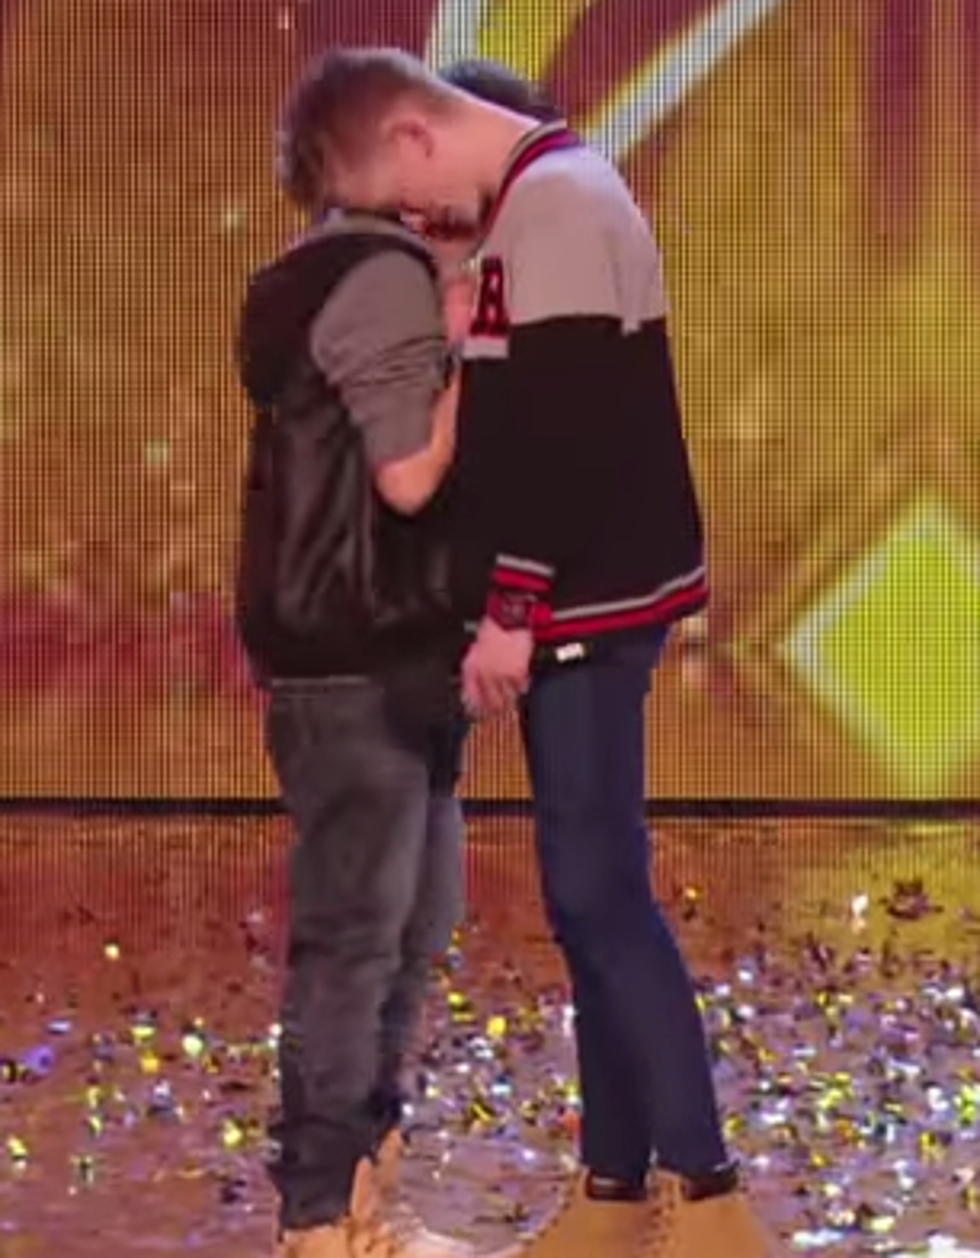 Bars & Melody Light Up the Stage at Britain’s Got Talent